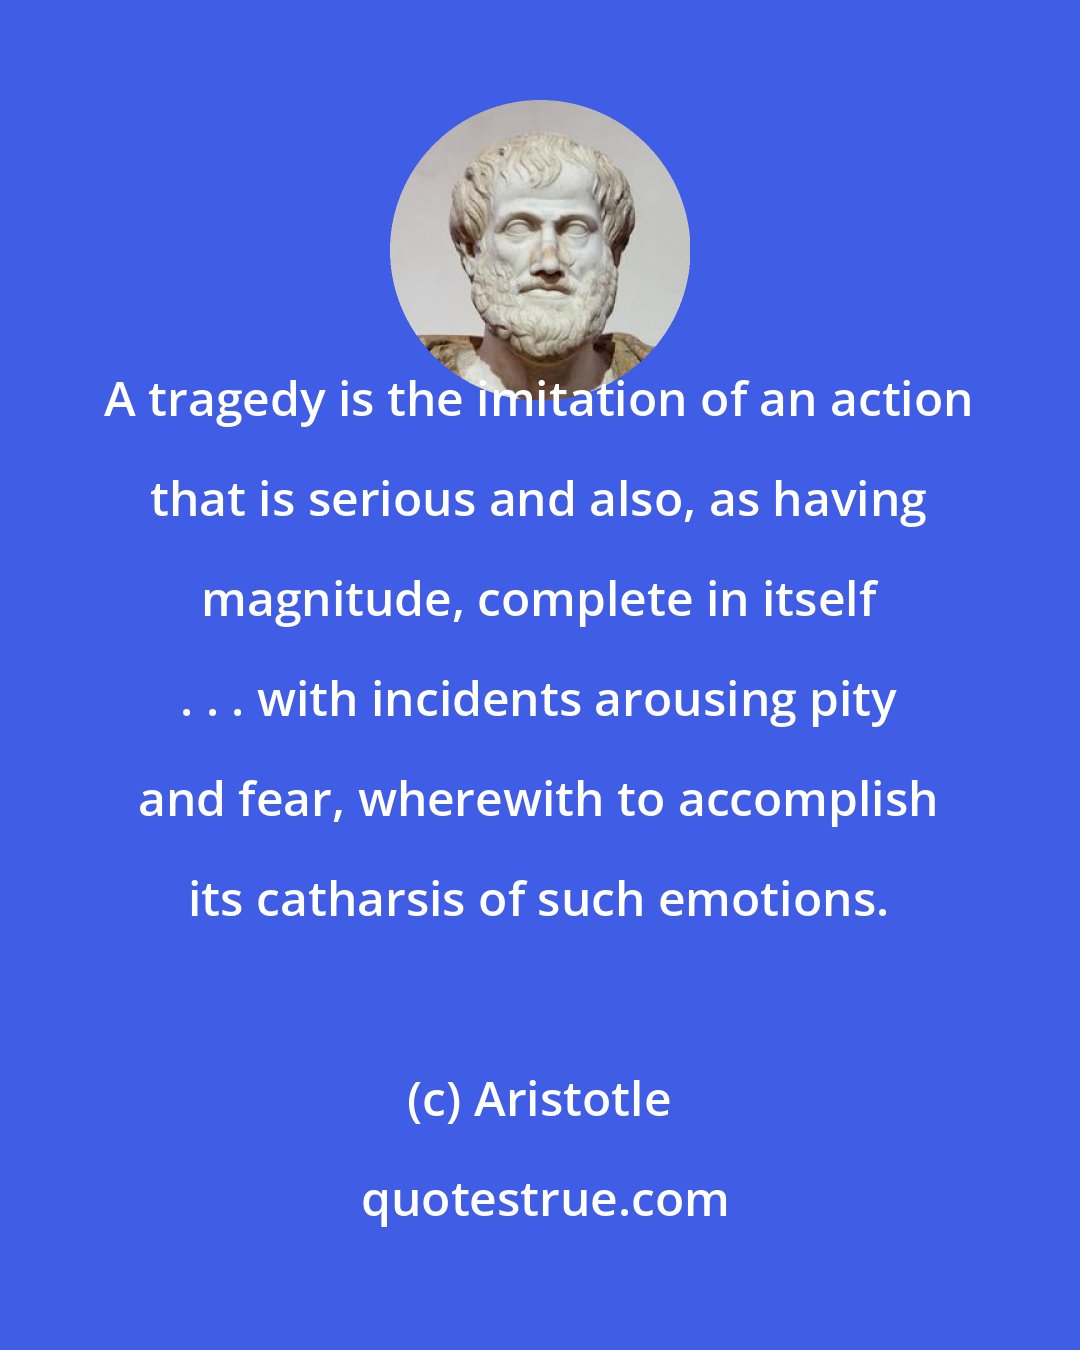 Aristotle: A tragedy is the imitation of an action that is serious and also, as having magnitude, complete in itself . . . with incidents arousing pity and fear, wherewith to accomplish its catharsis of such emotions.